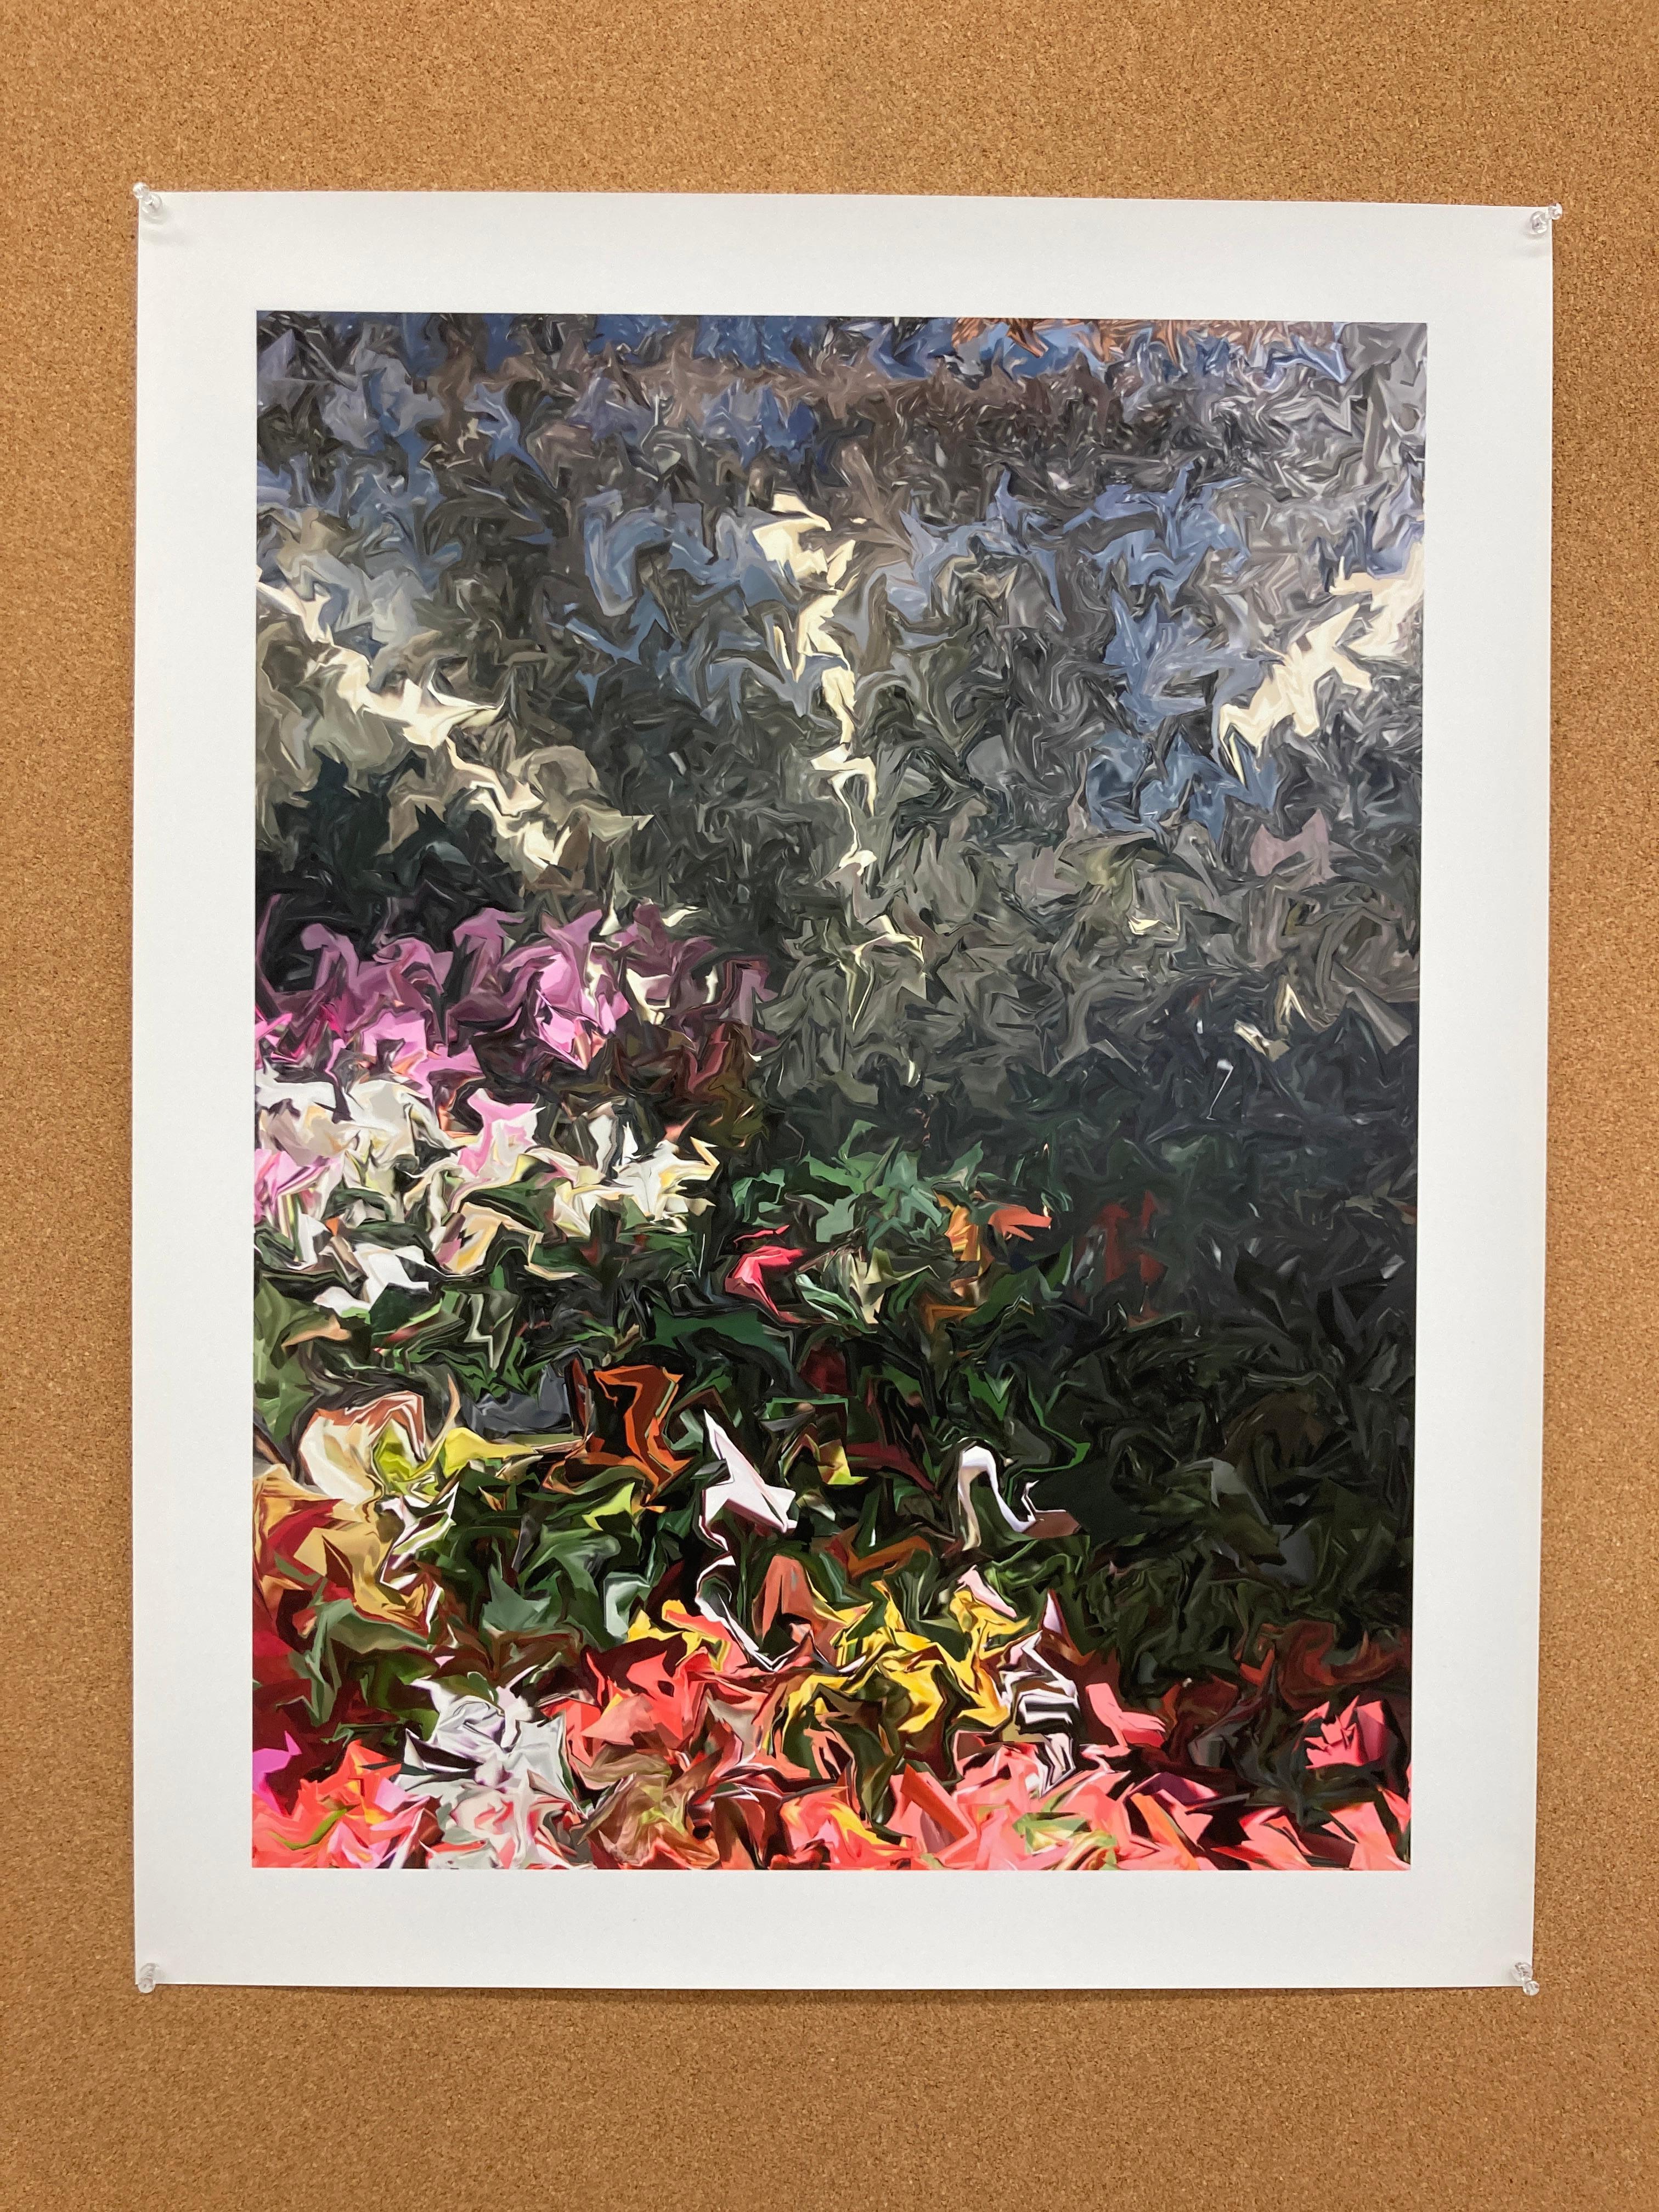 Begonias and Orchids, 2018, digitally manipulated photograph, signed - Print by Gary Cruz